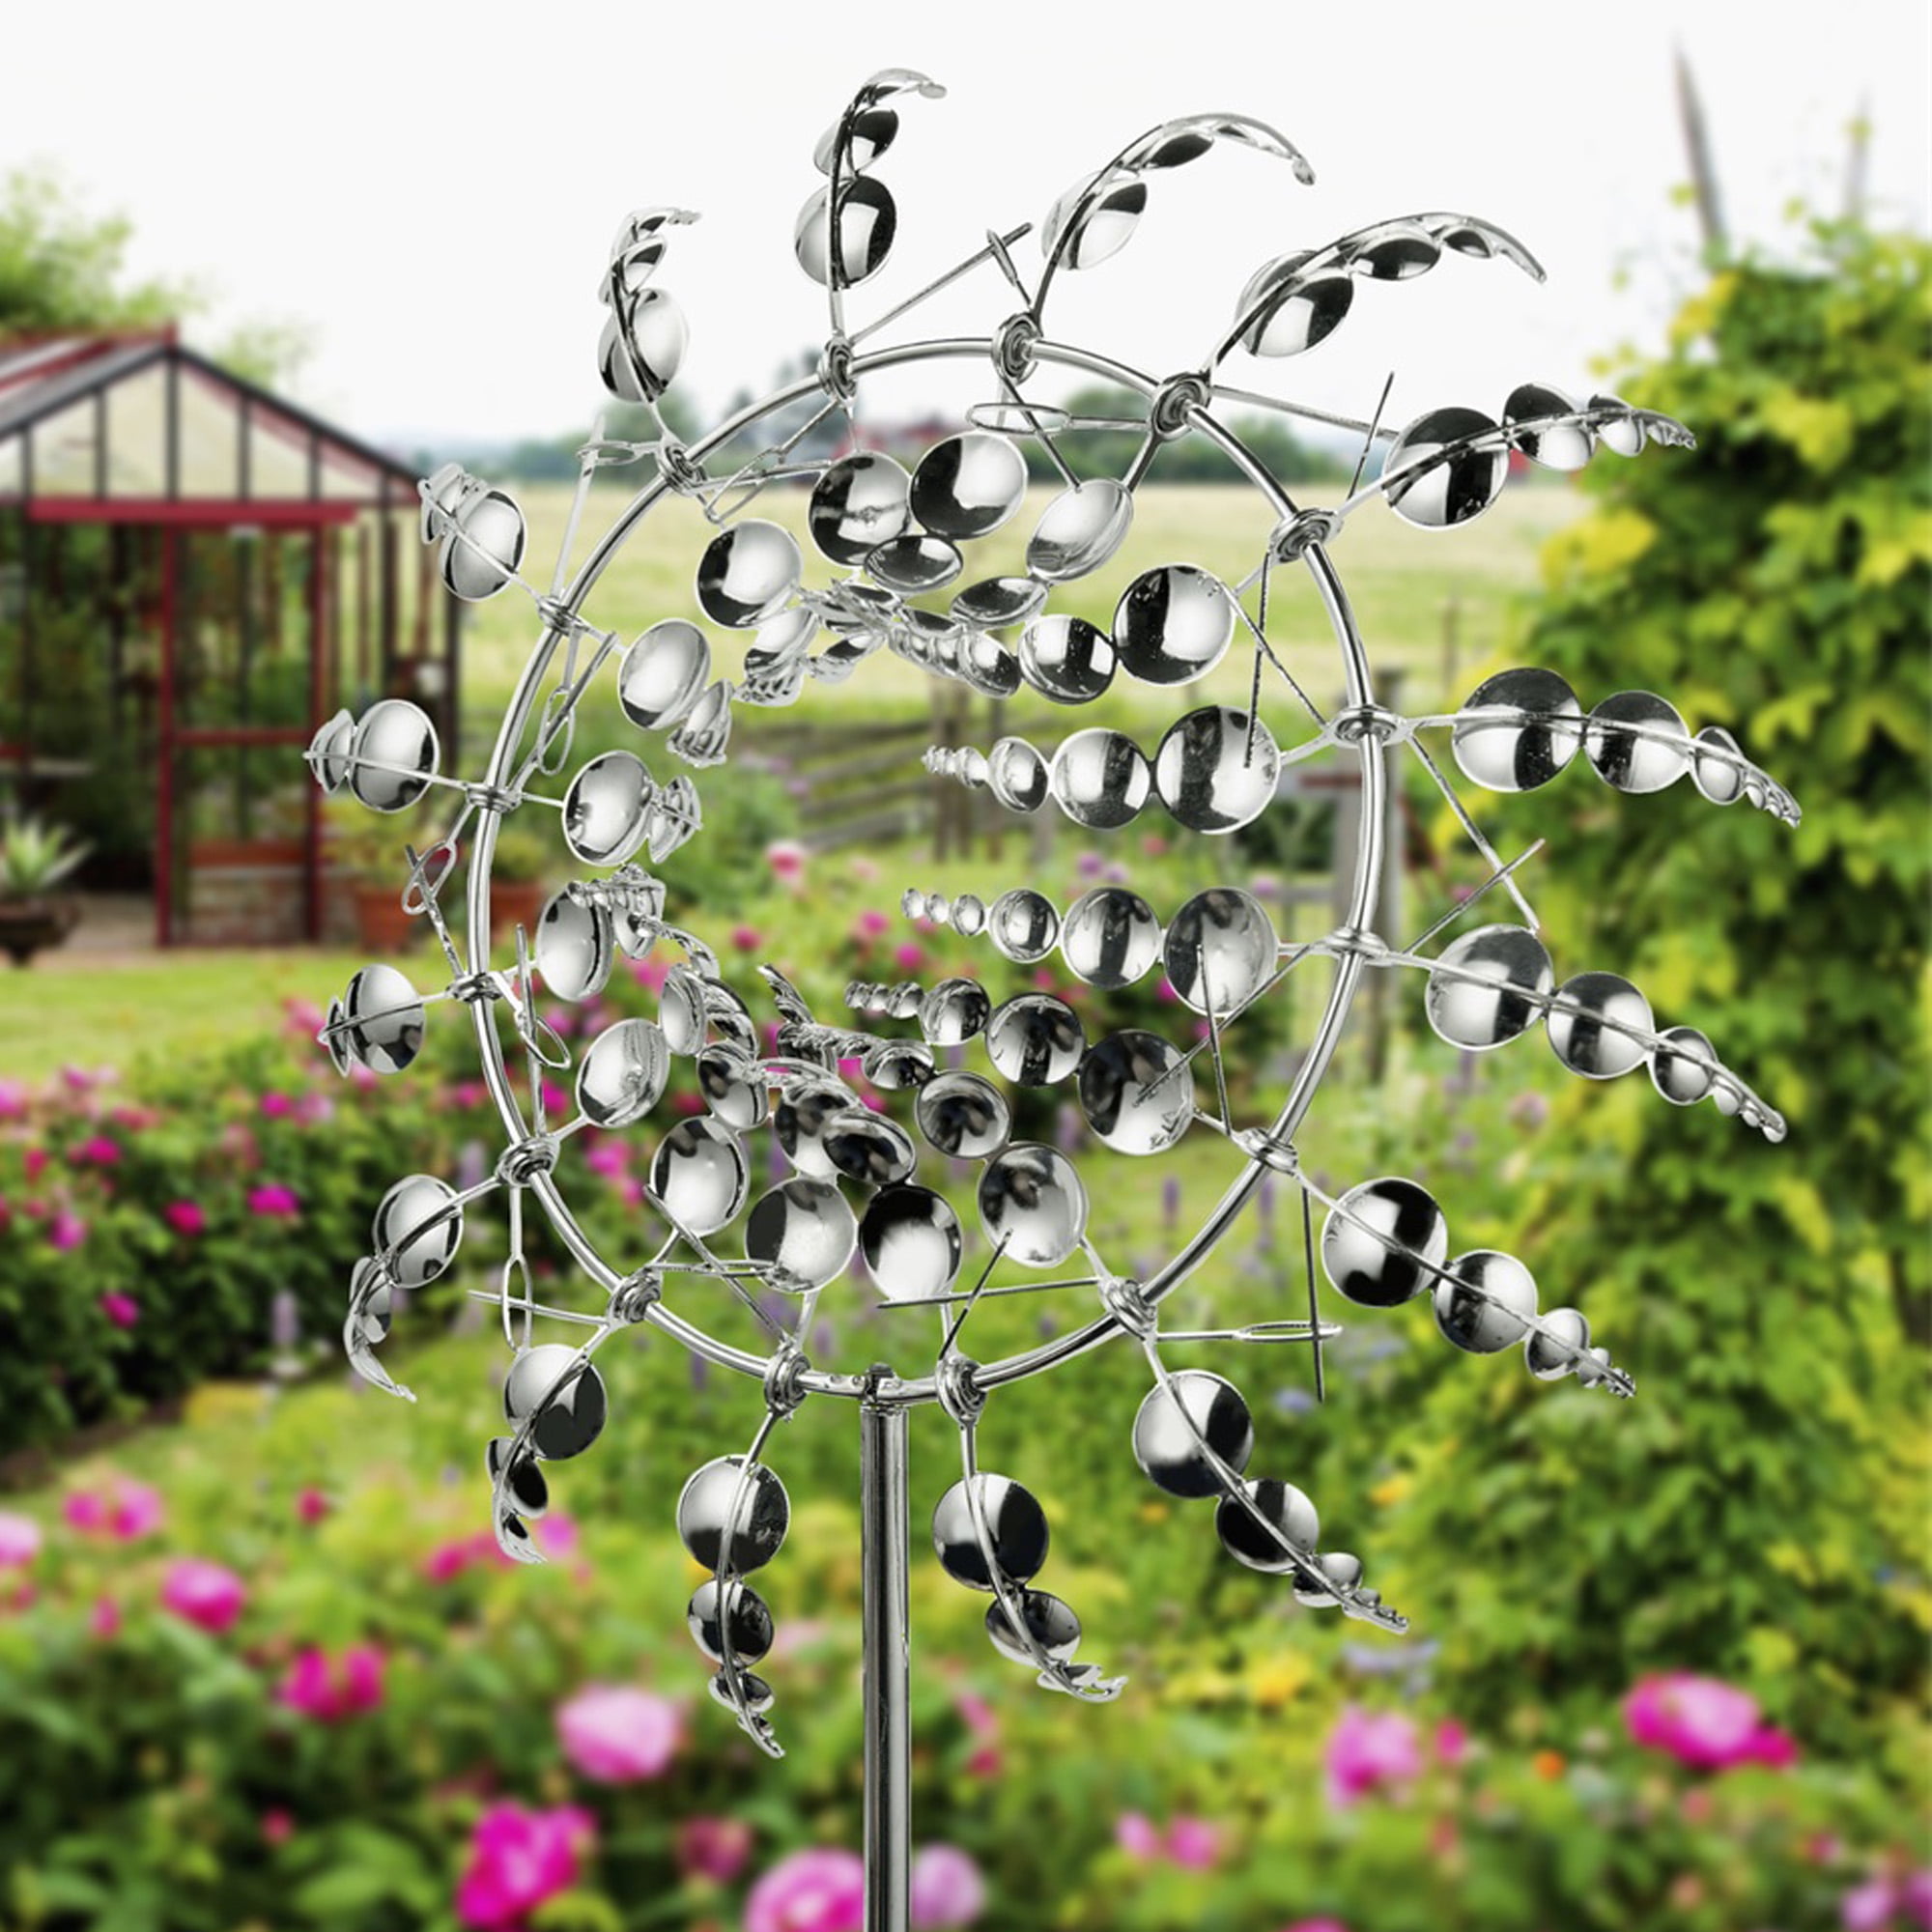 WinWindSpinner Kinetic Wind Spinners Outdoor Metal Yard Spinner with Gardening Decorations with Dual Direction Decorative Lawn Ornament Wind Mills 